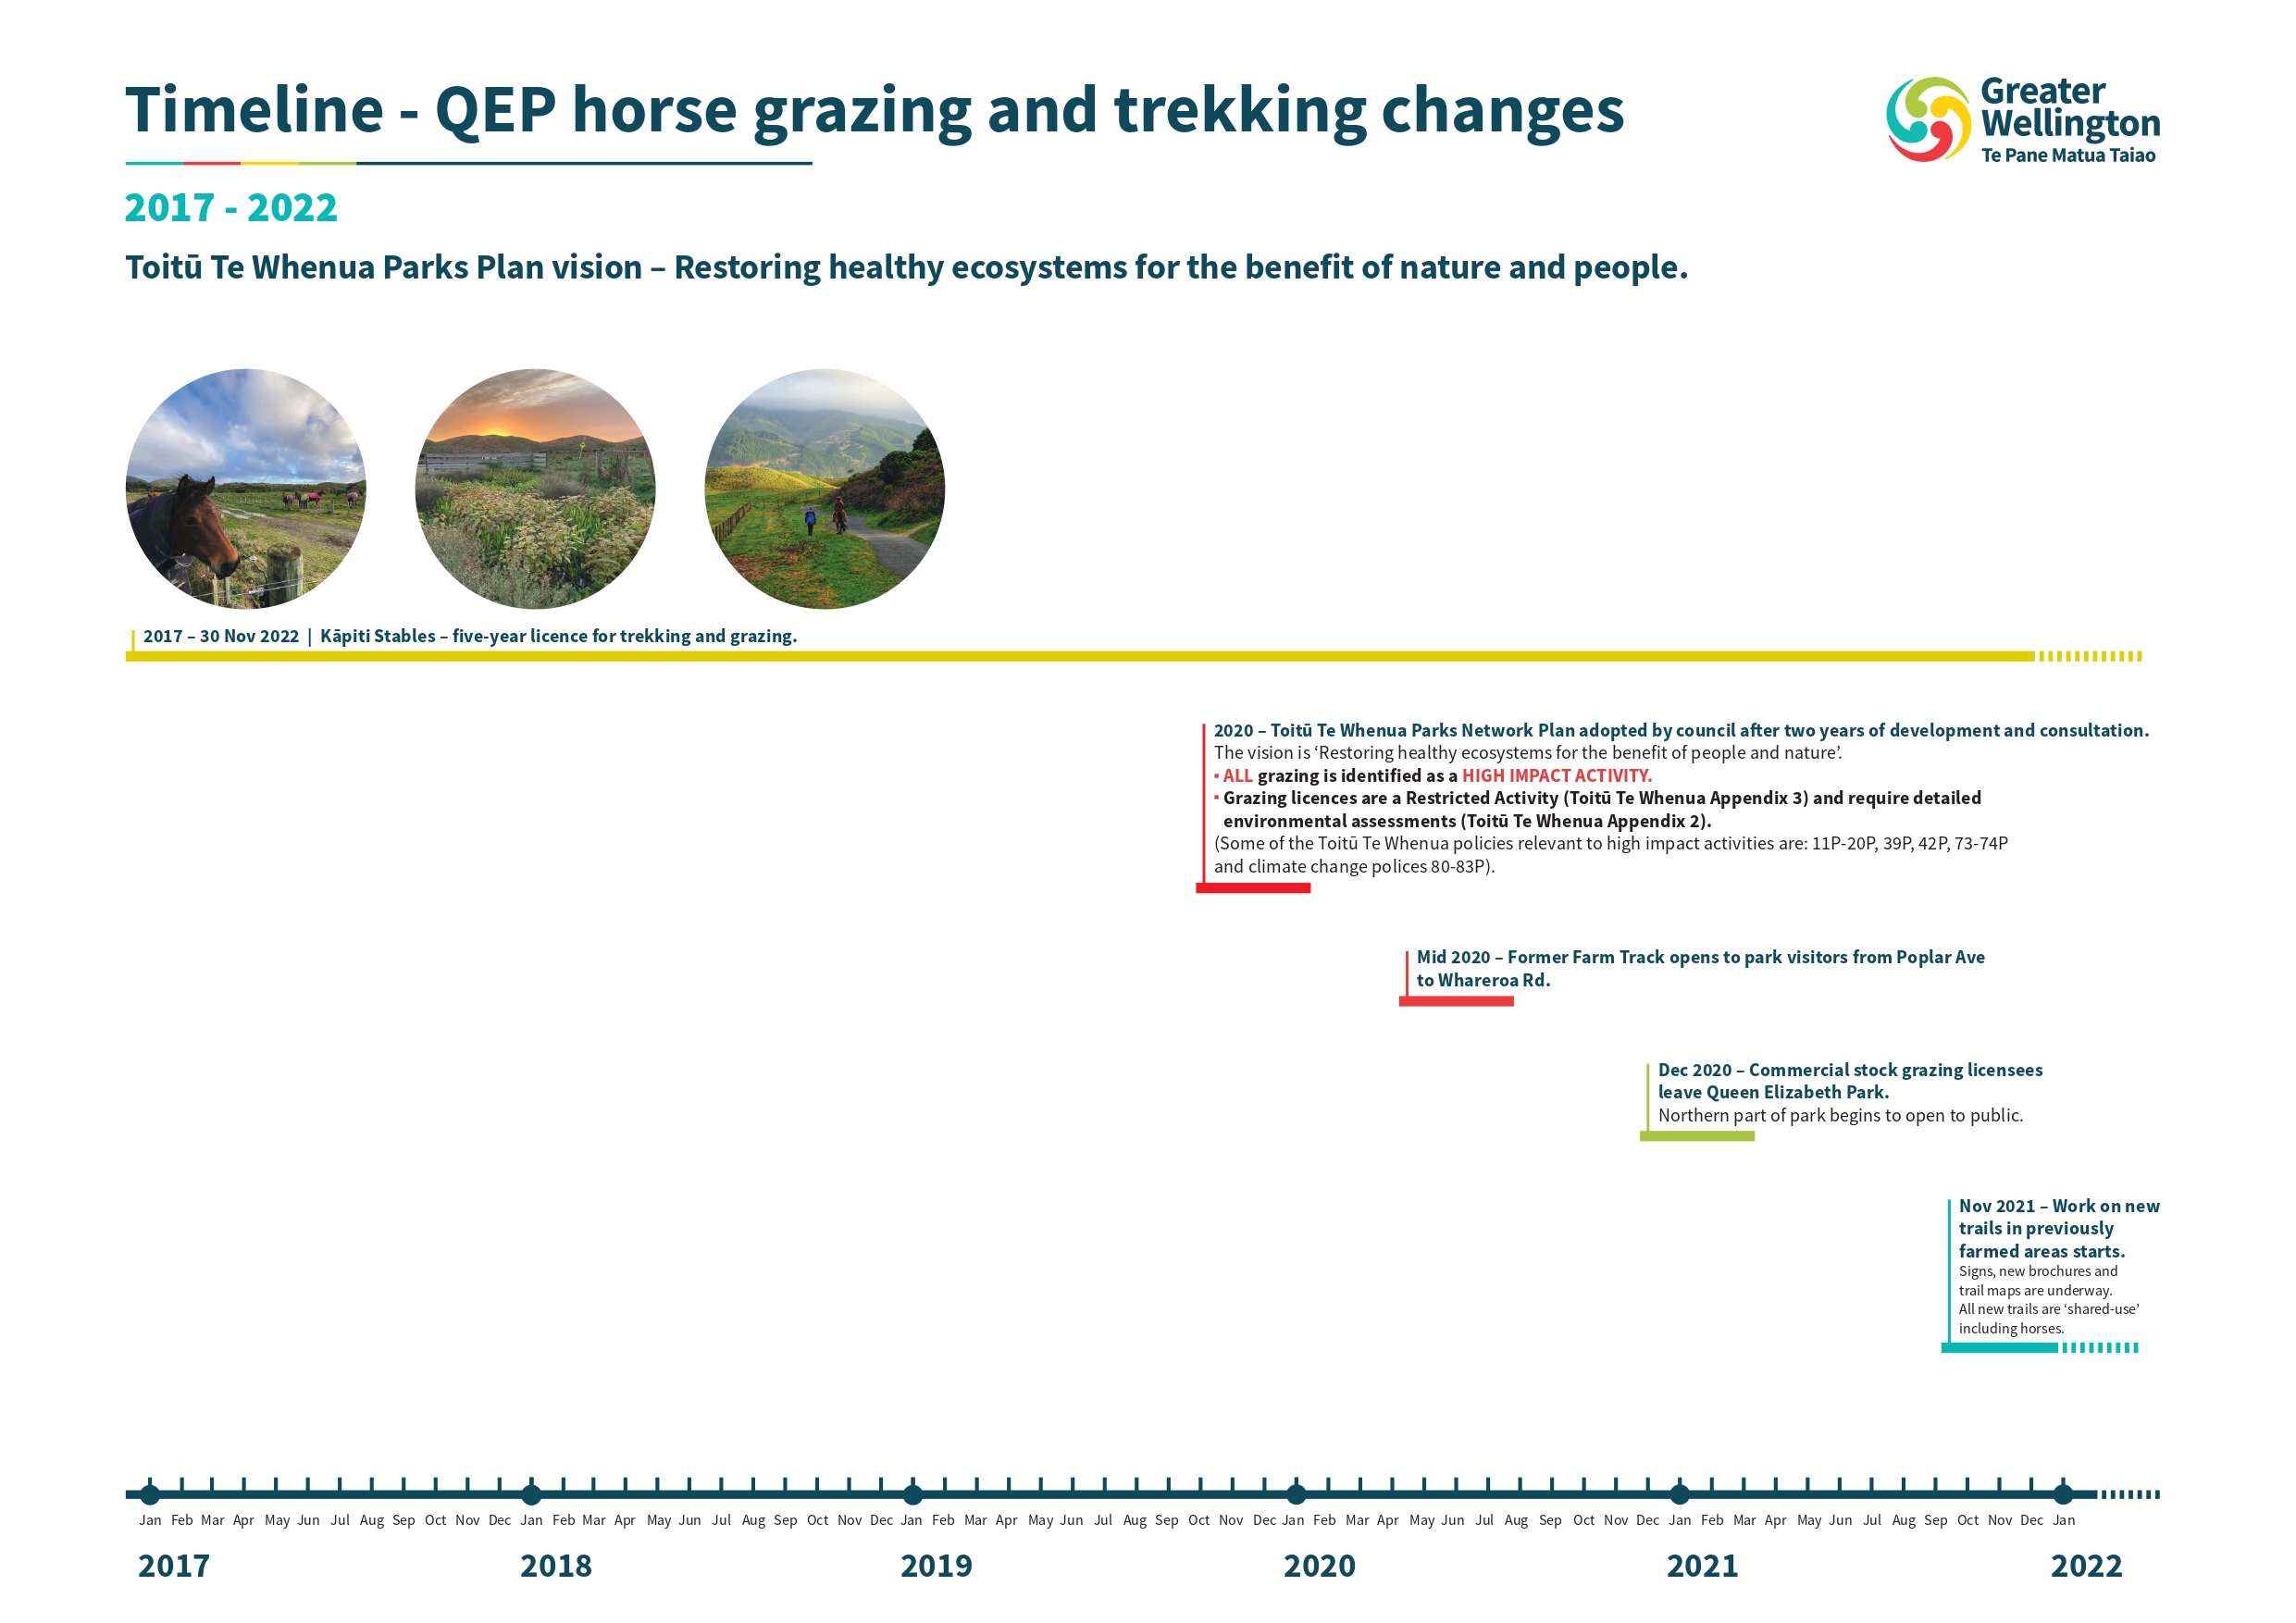 Timeline of QEP horse grazing and trekking changes from 2017 to 2022